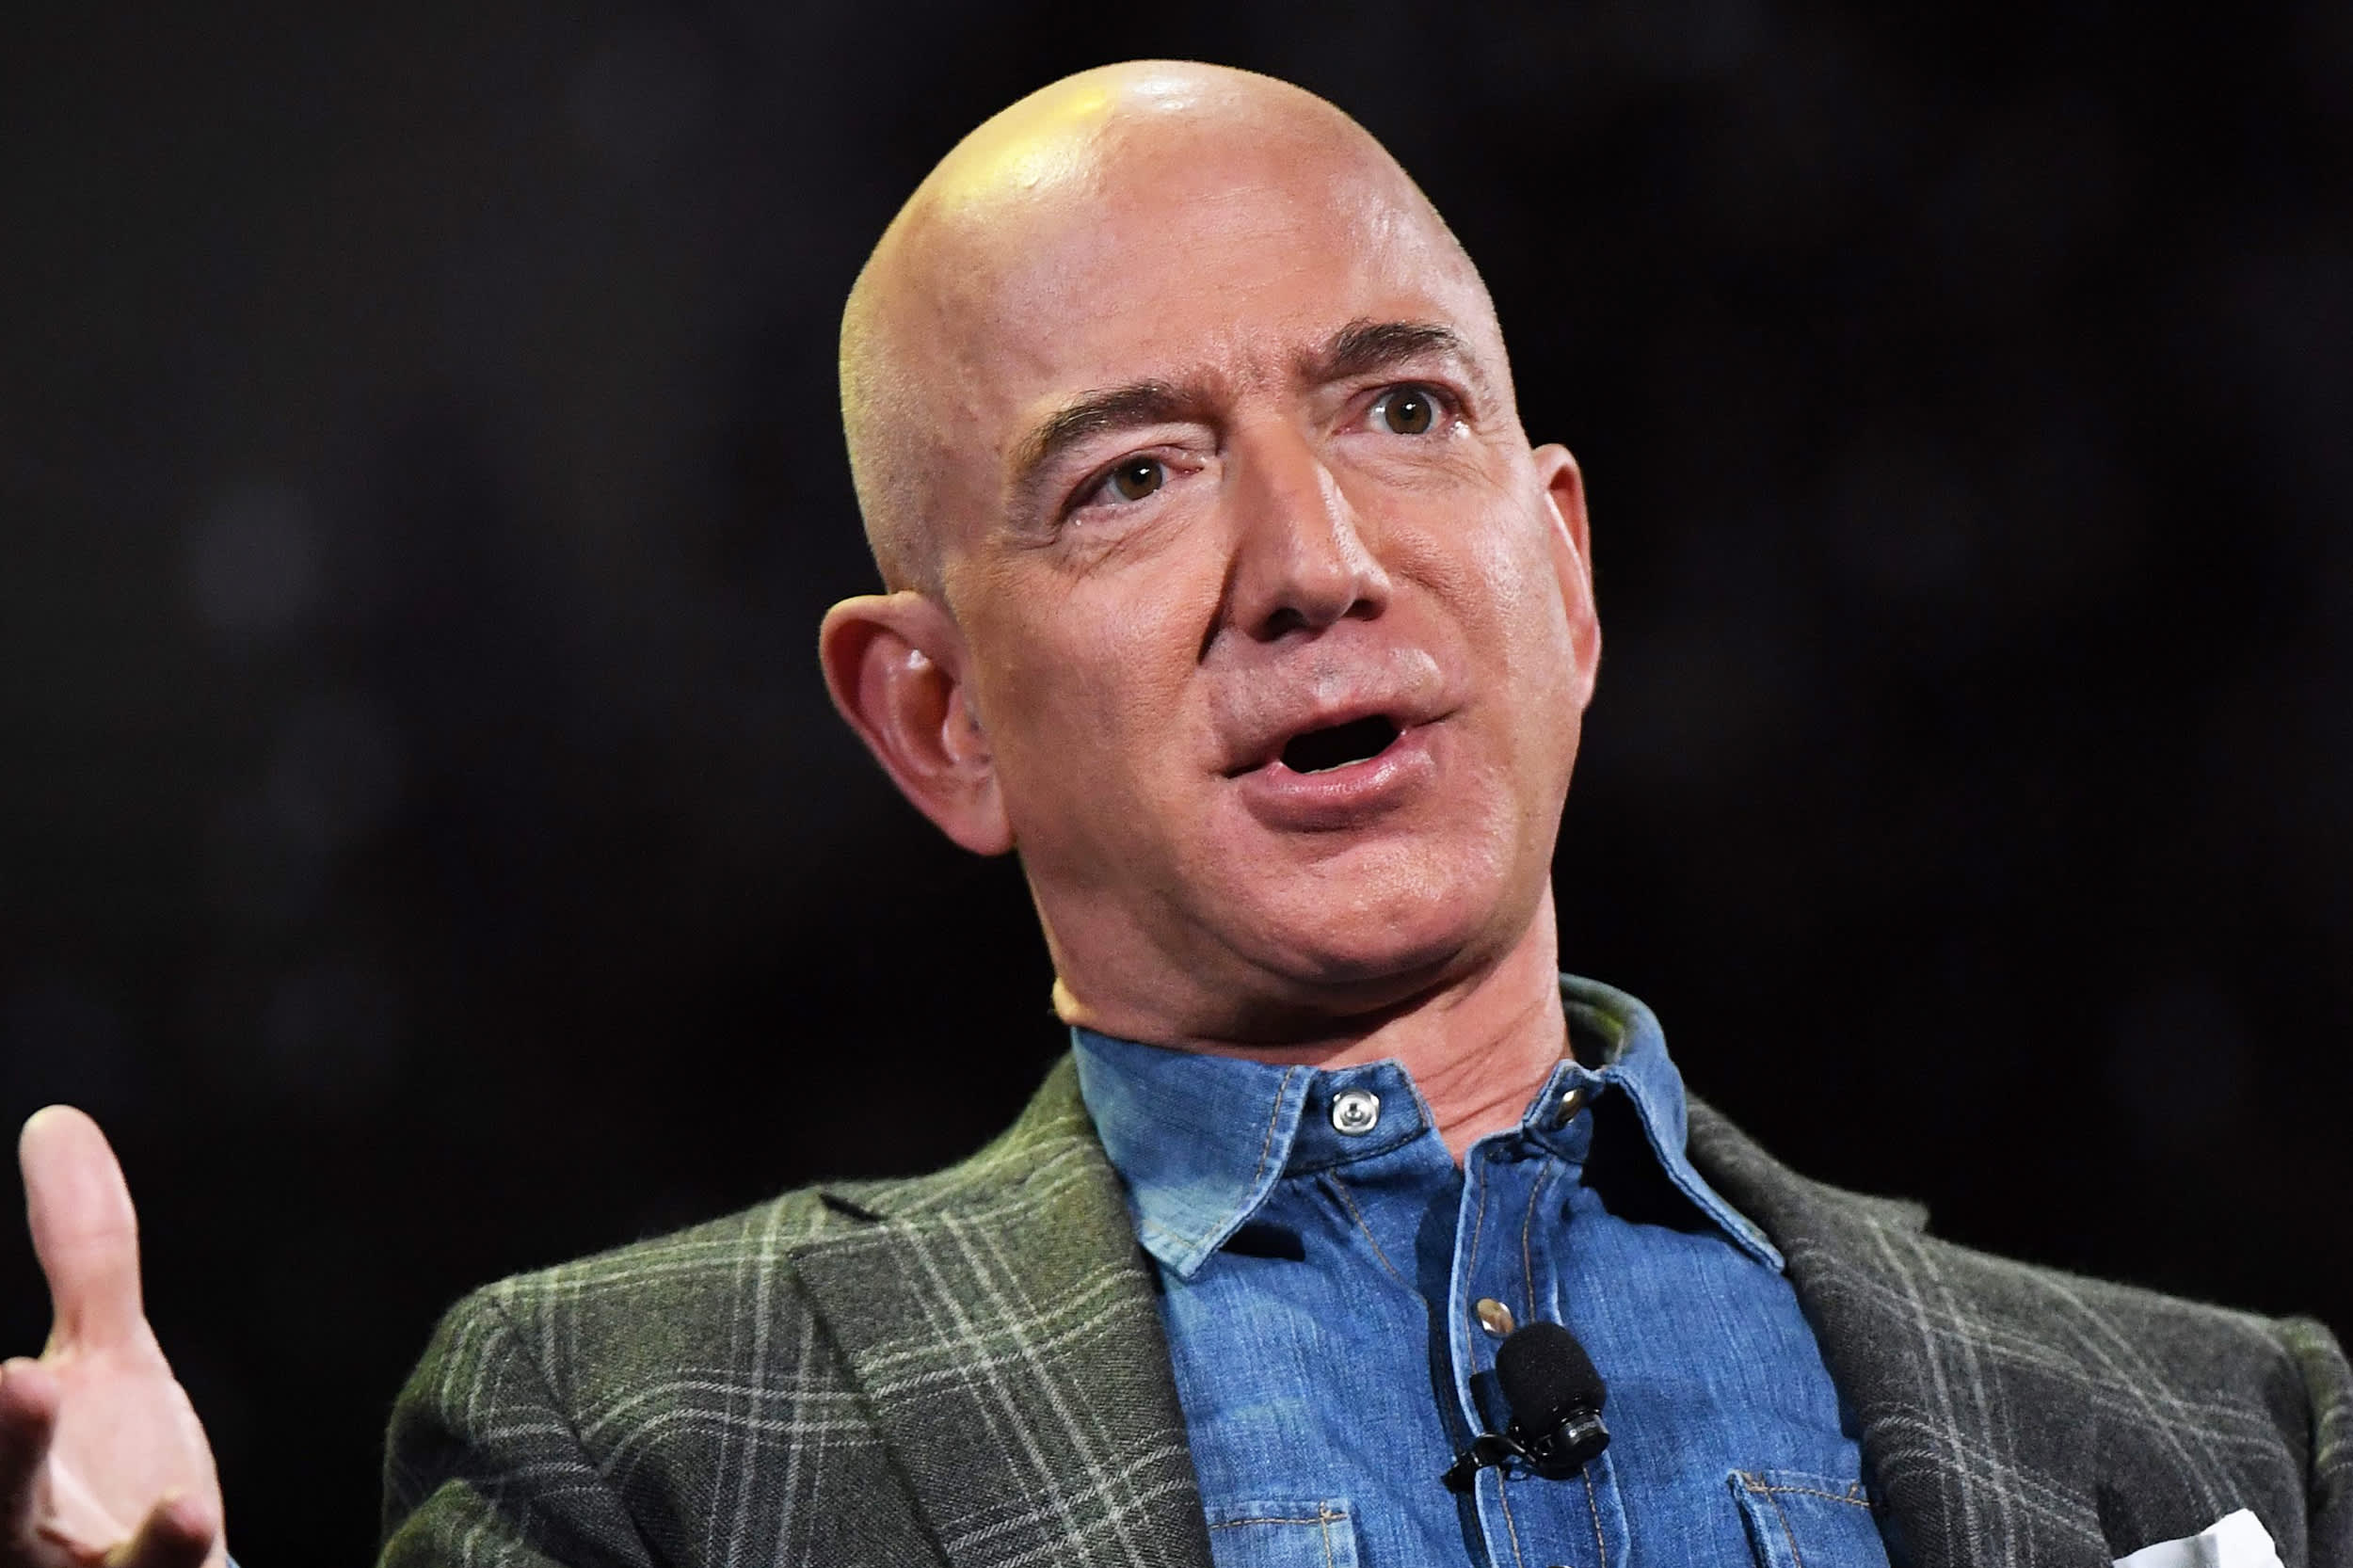 Jeff Bezos says he supports an increase in the corporate tax rate